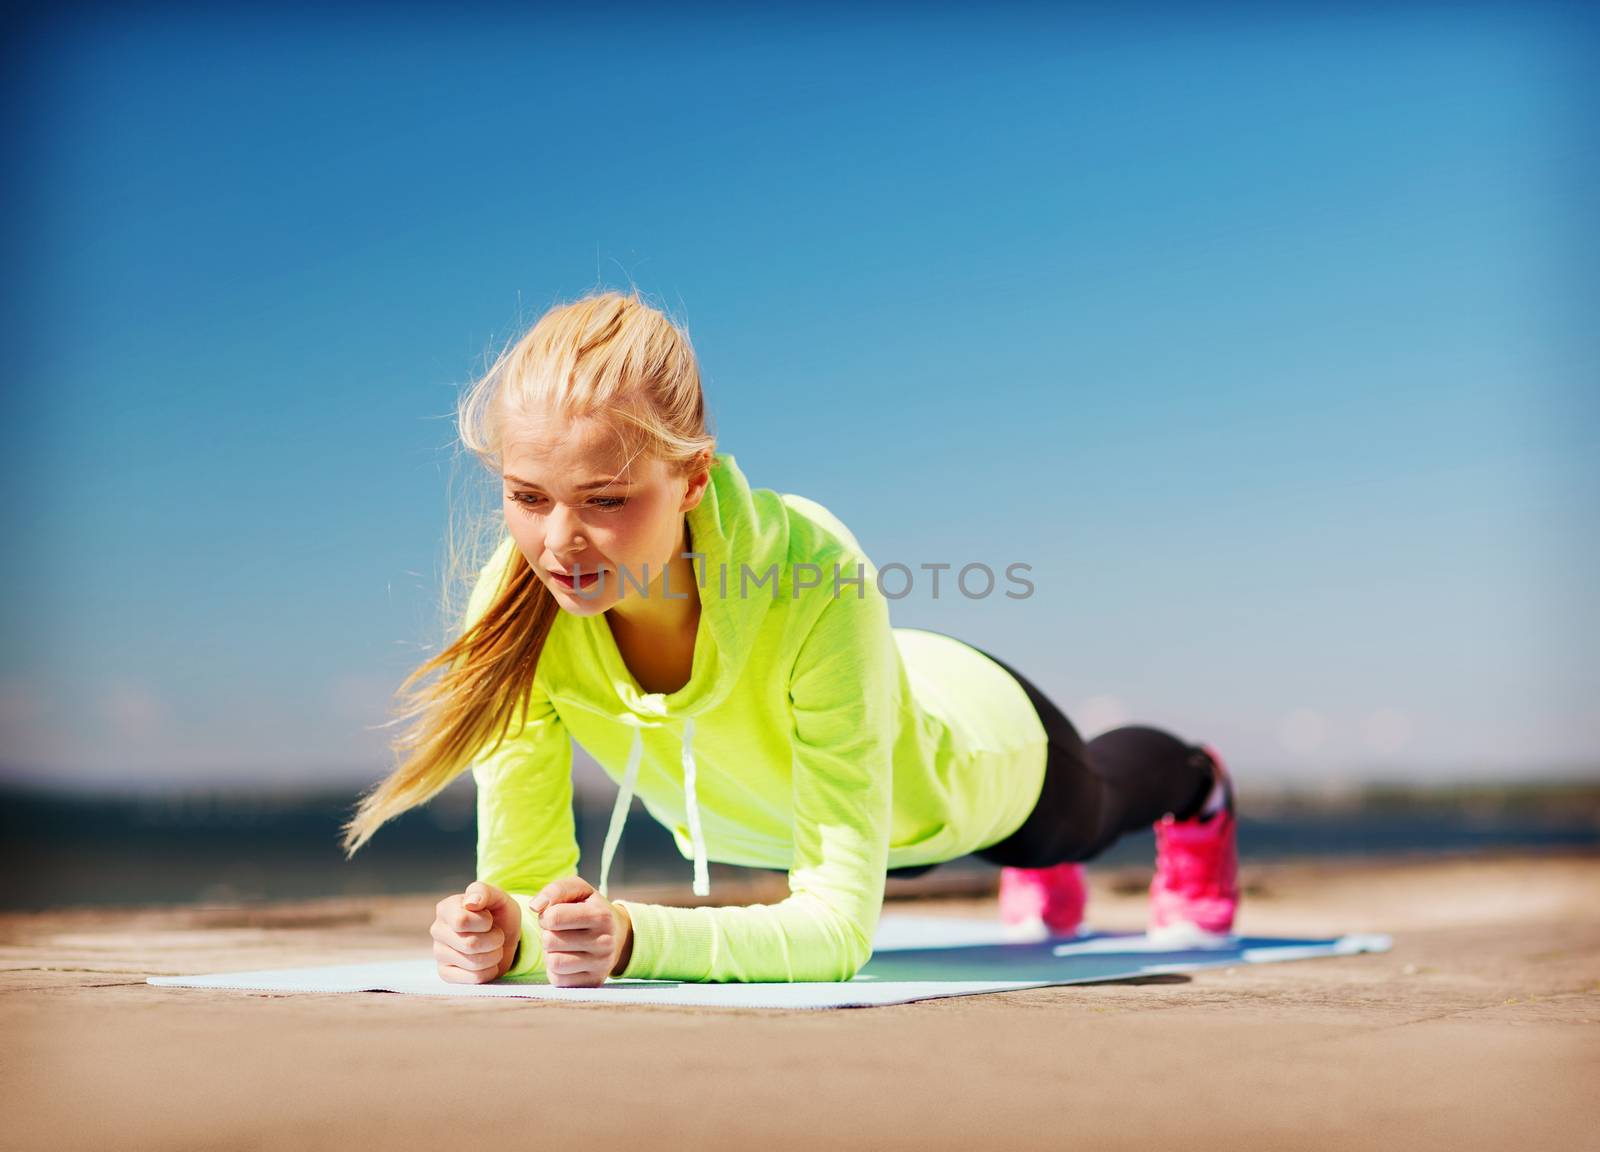 woman doing sports outdoors by dolgachov